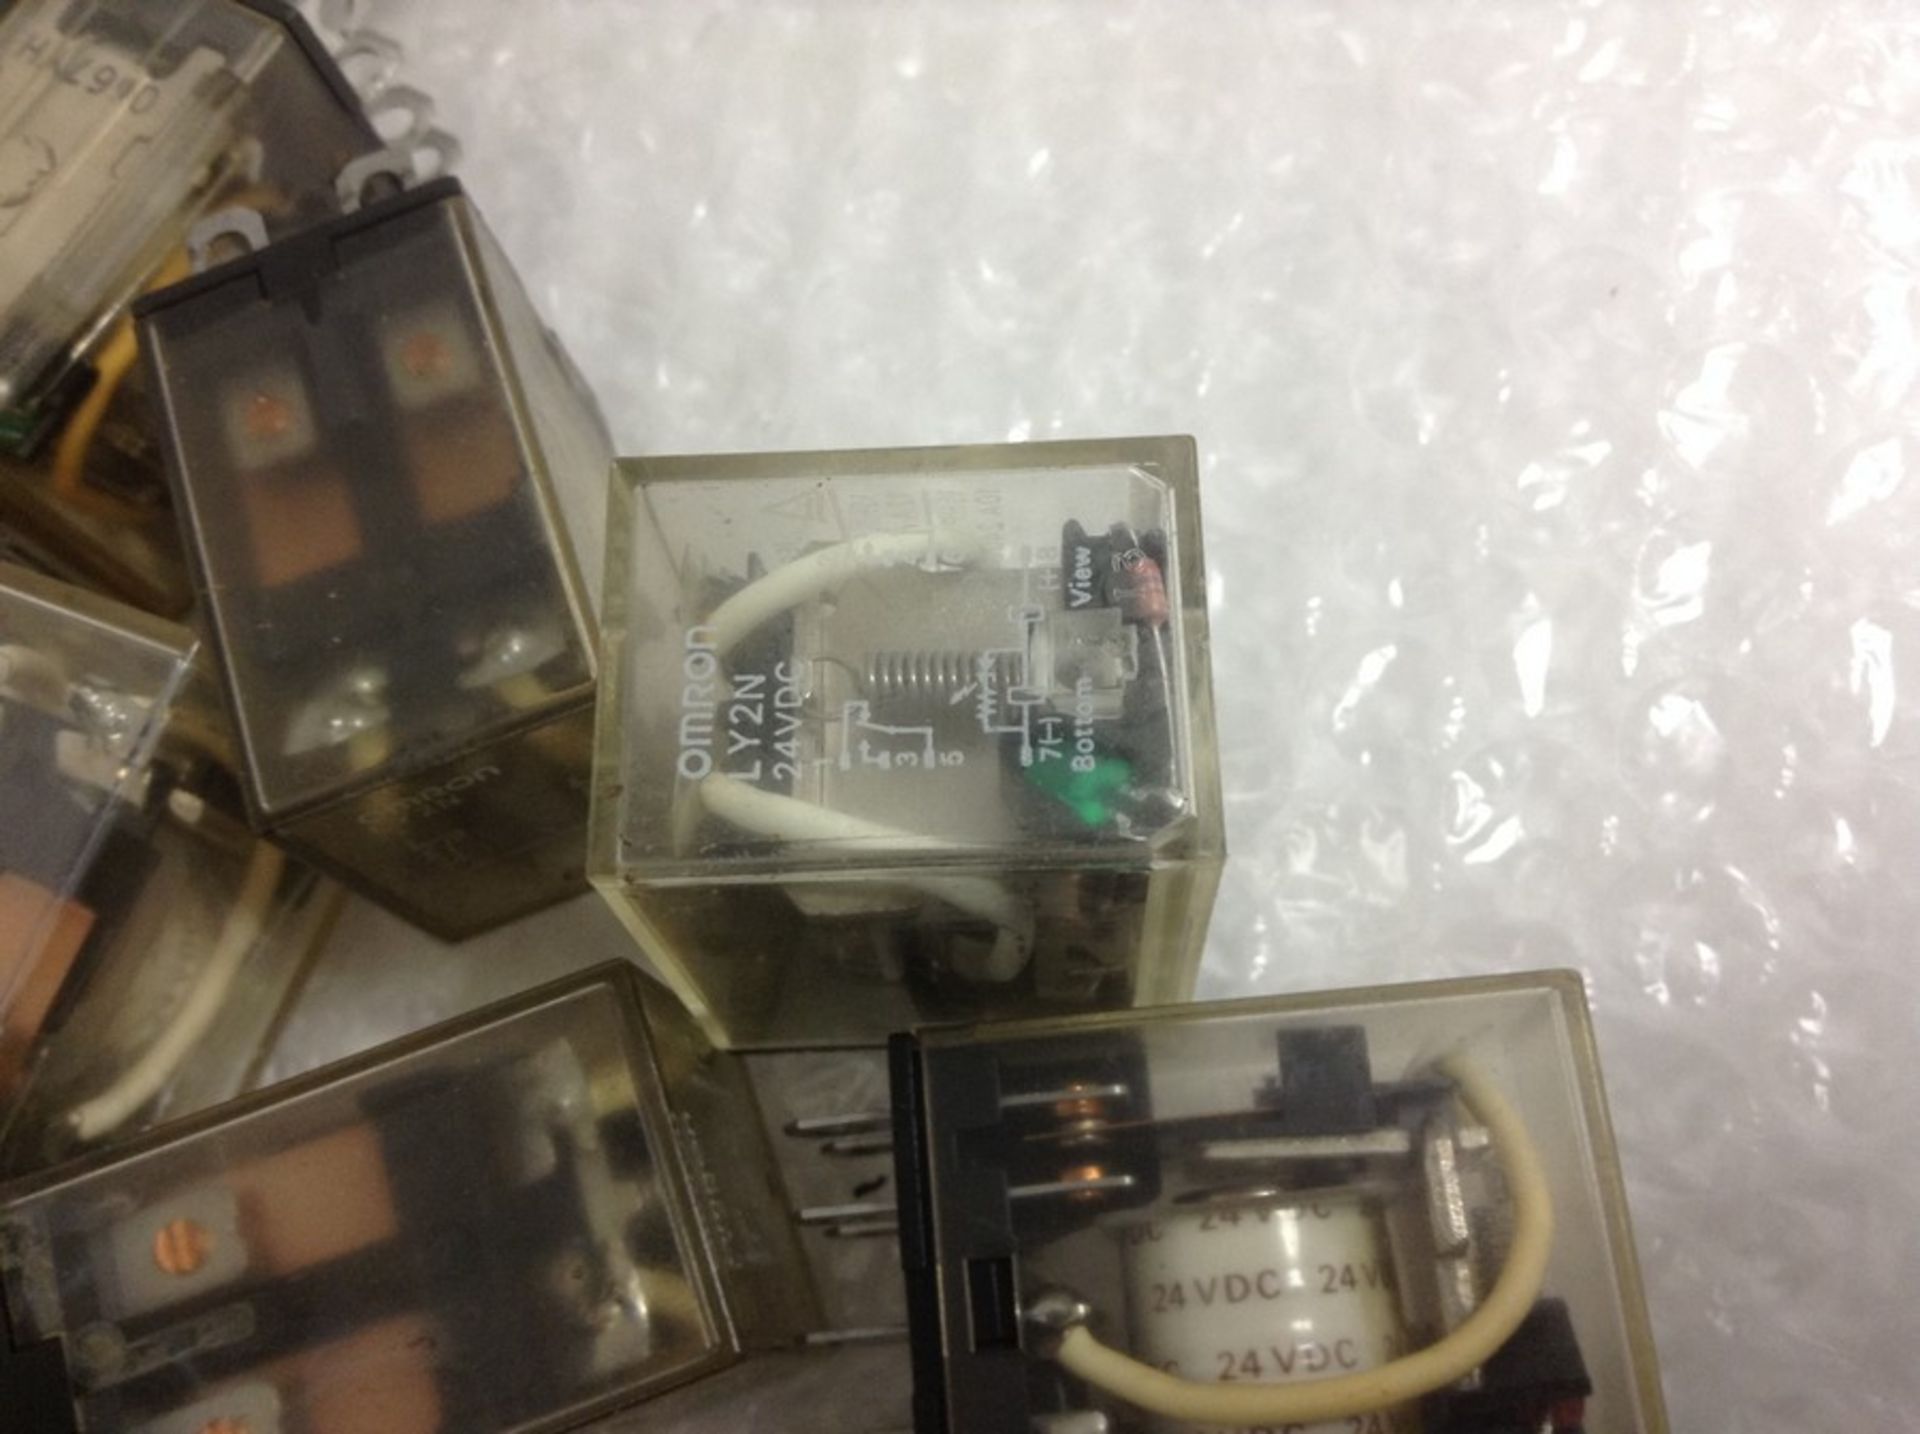 Lot of Omron LY2N 24 VDC relays 24 VDC coil - Image 2 of 2